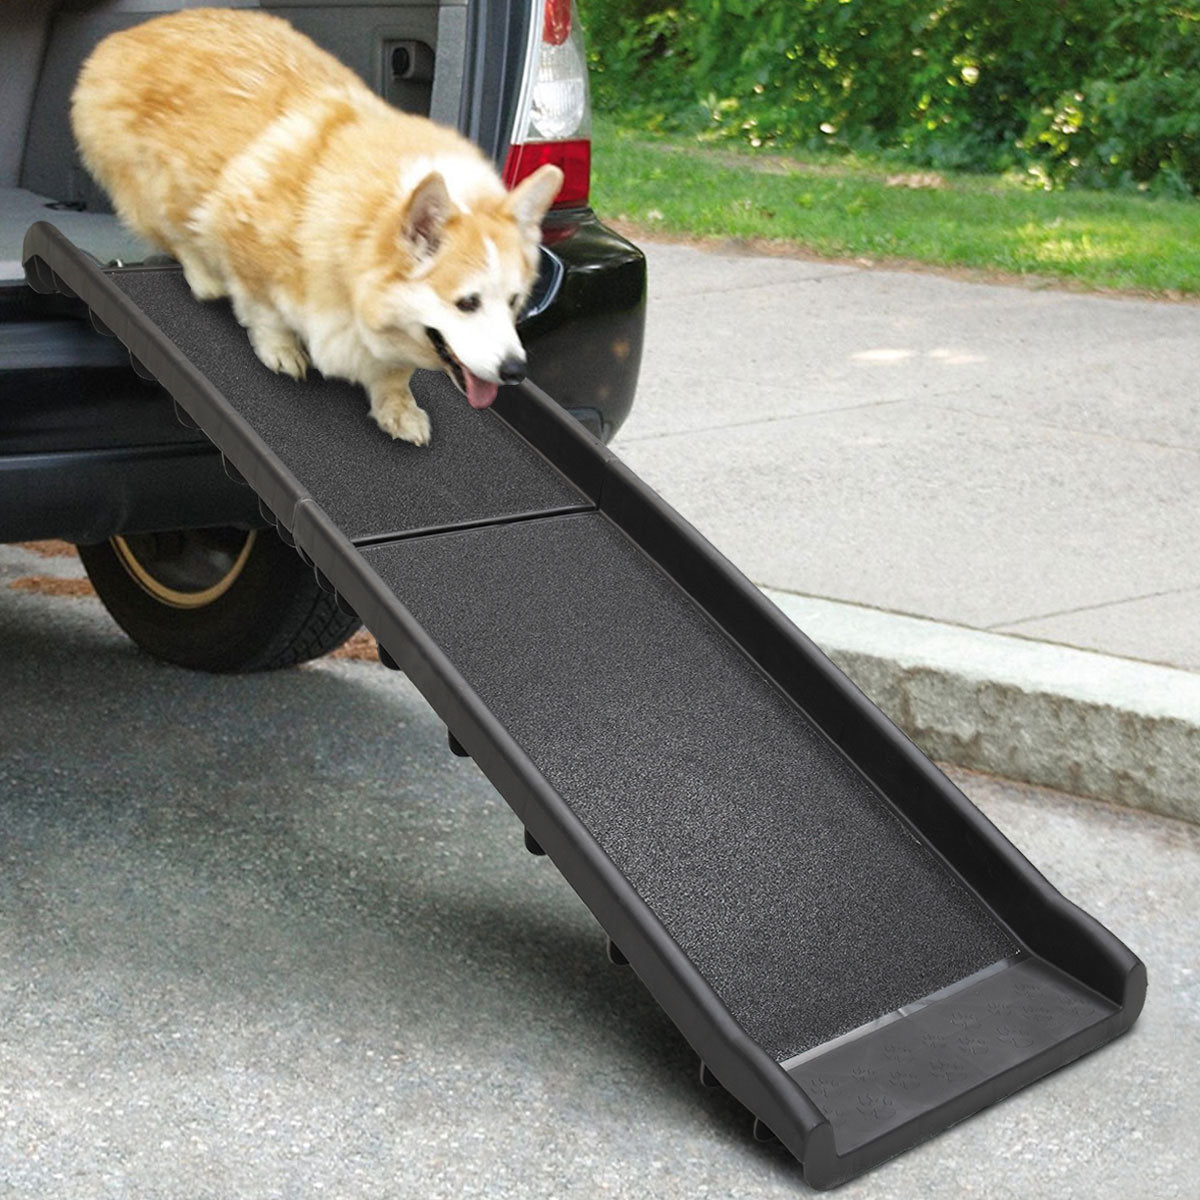 Portable Lightweight Dog Pet Ramp with Nonslip Surface and Raised Safety Rails, Outdoors